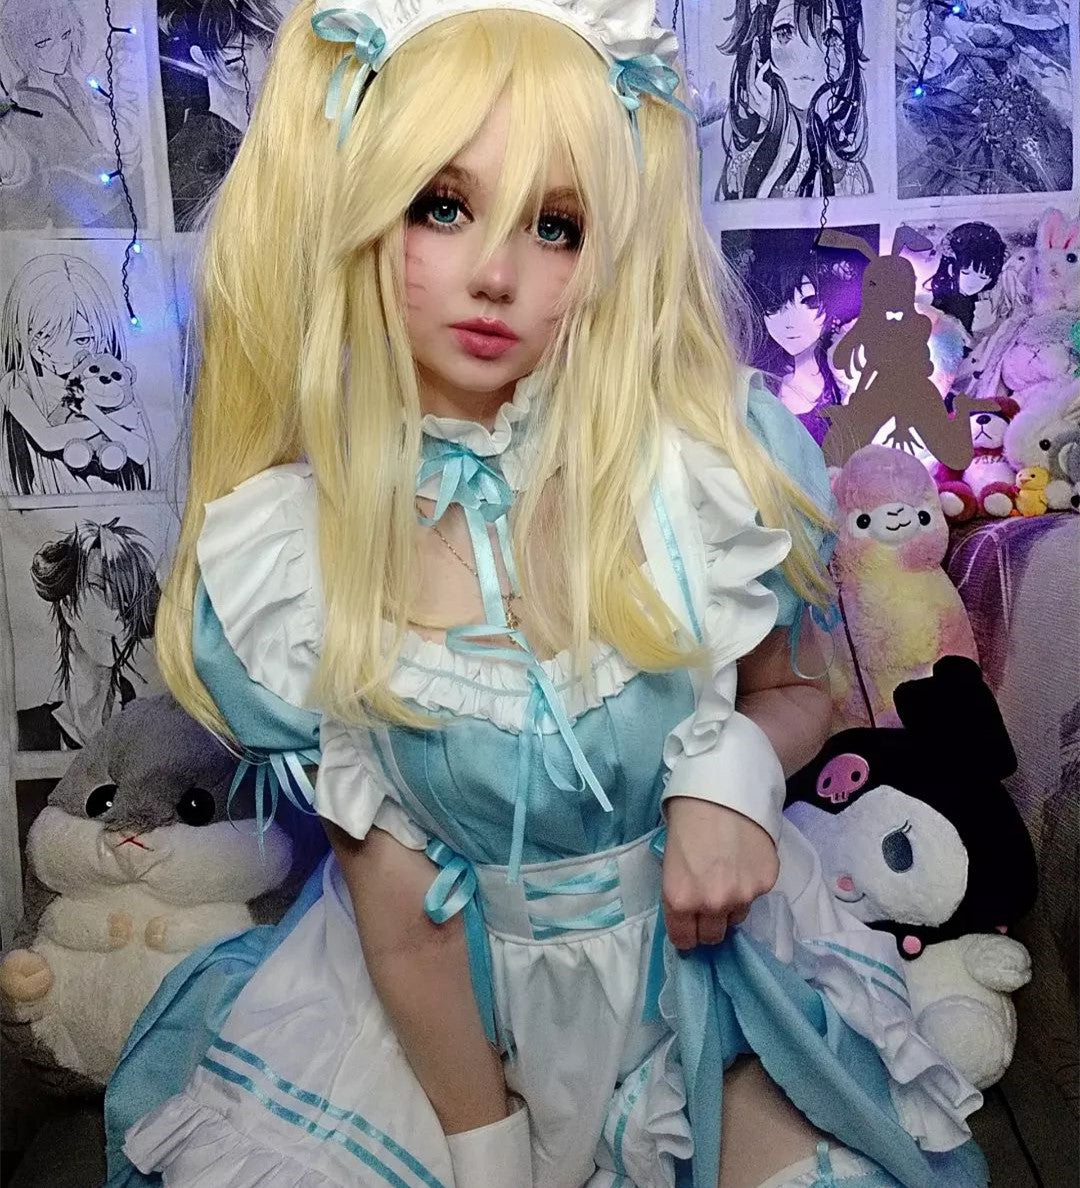 Review for Powder blue lolita maid outfit YV43989